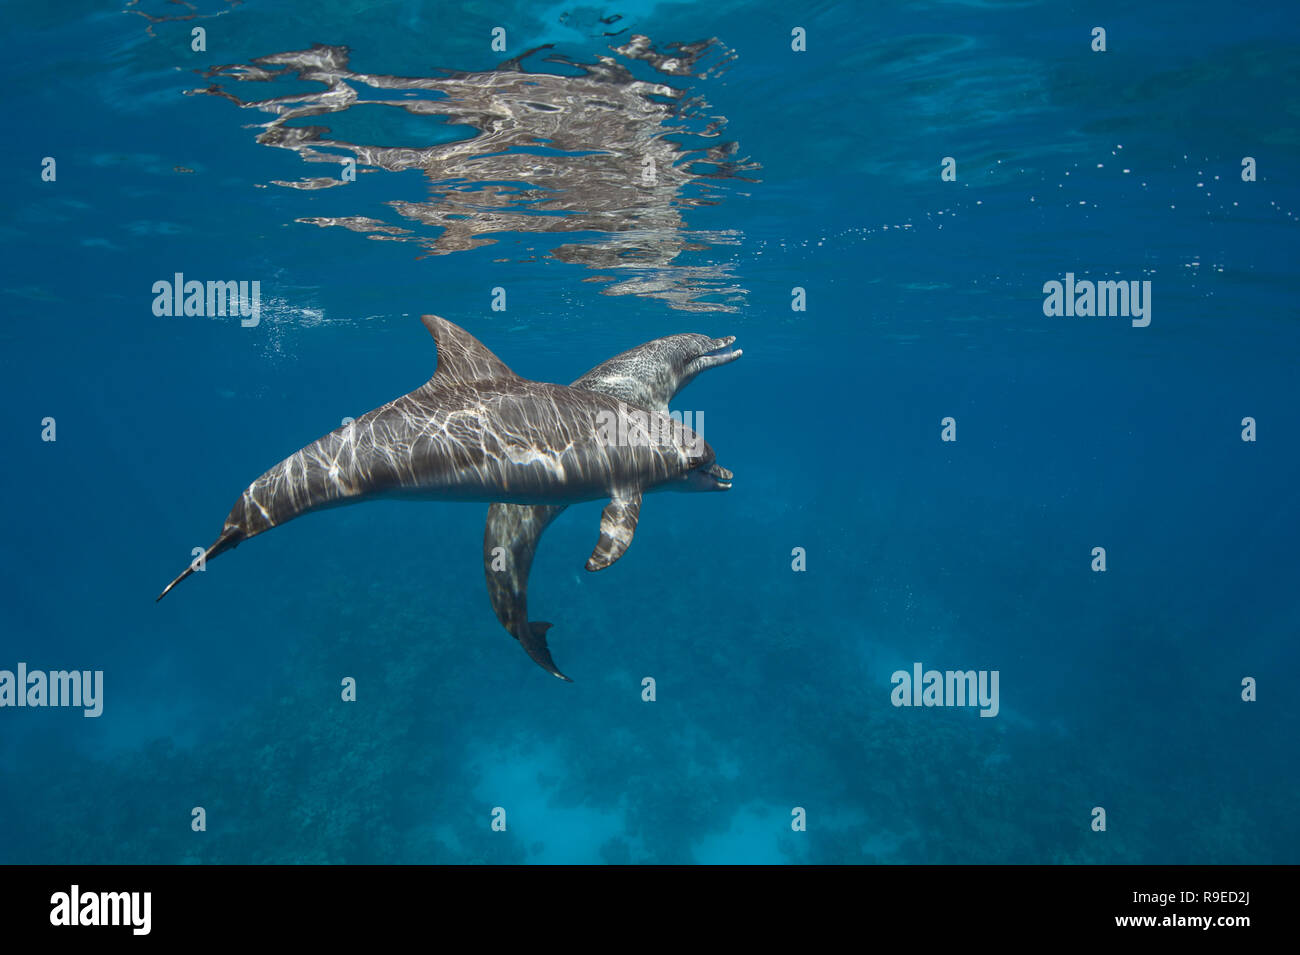 A school of wild bottlenose dolphins swimming in the crystal clear waters of the Red Sea near Hurghada, Egypt. Stock Photo